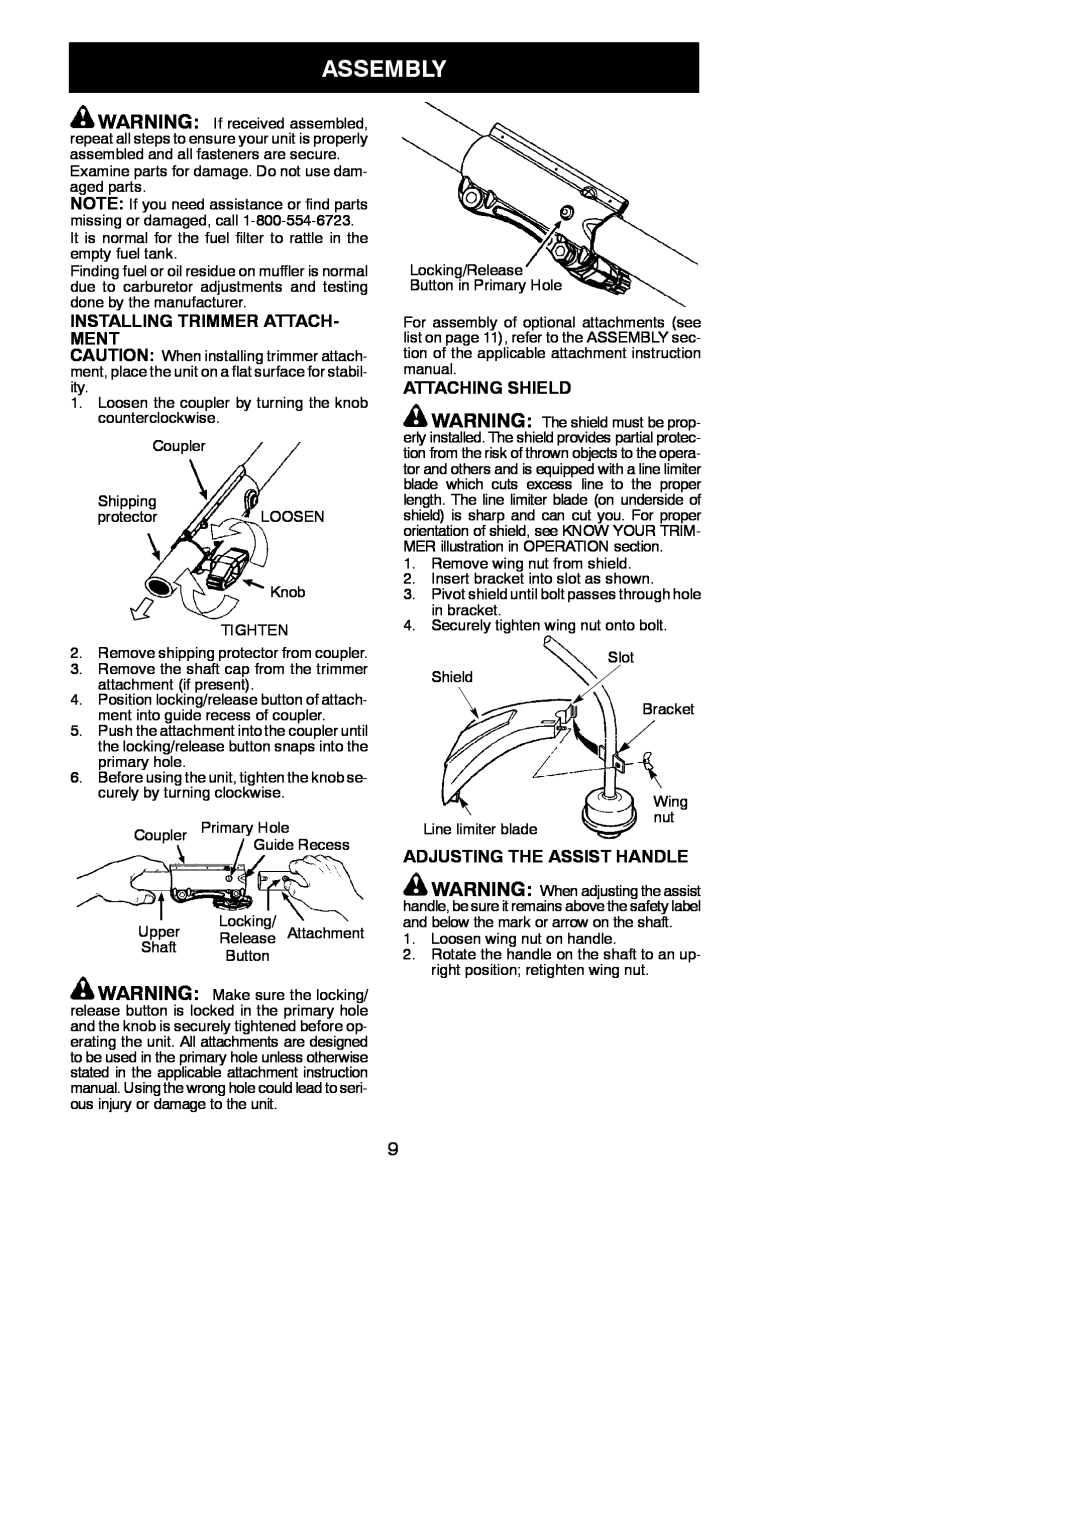 Poulan 115249426 Assembly, Installing Trimmer Attach- Ment, Attaching Shield, Adjusting The Assist Handle 